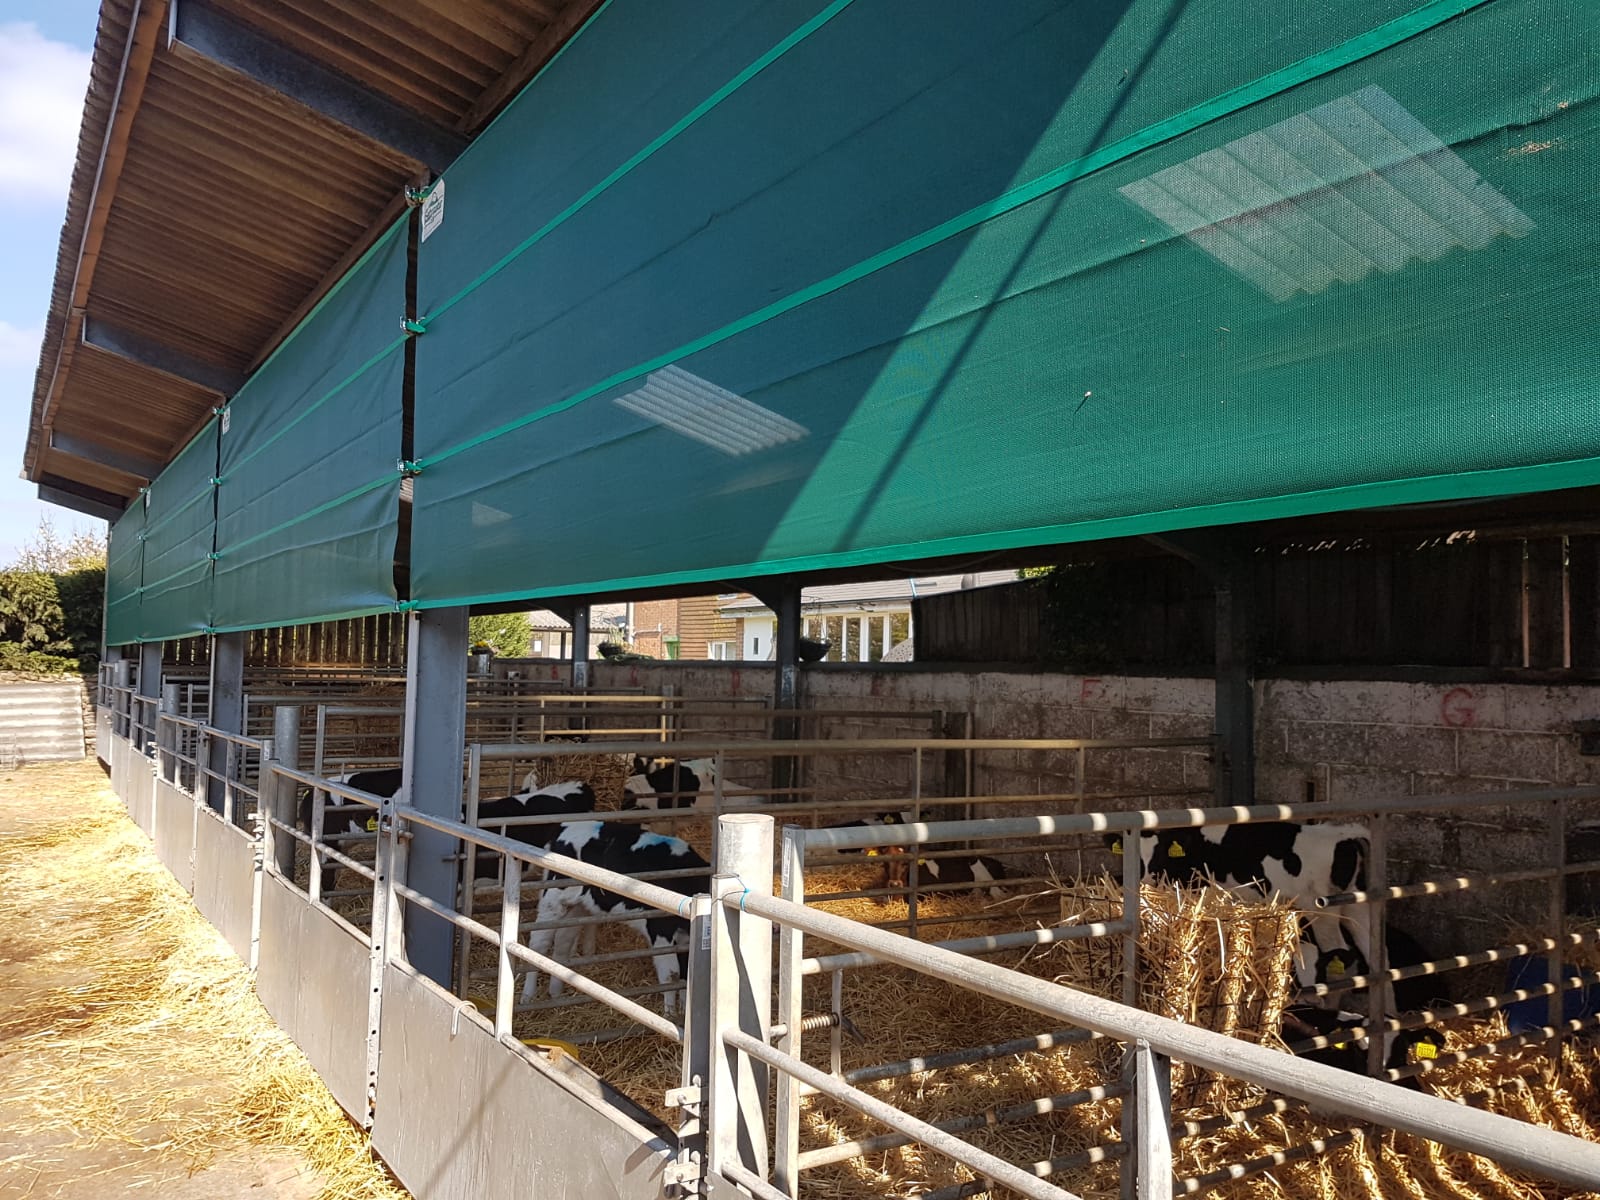 Solid pen gates to calf height with mesh walls above allows air flow without draughts or rain.